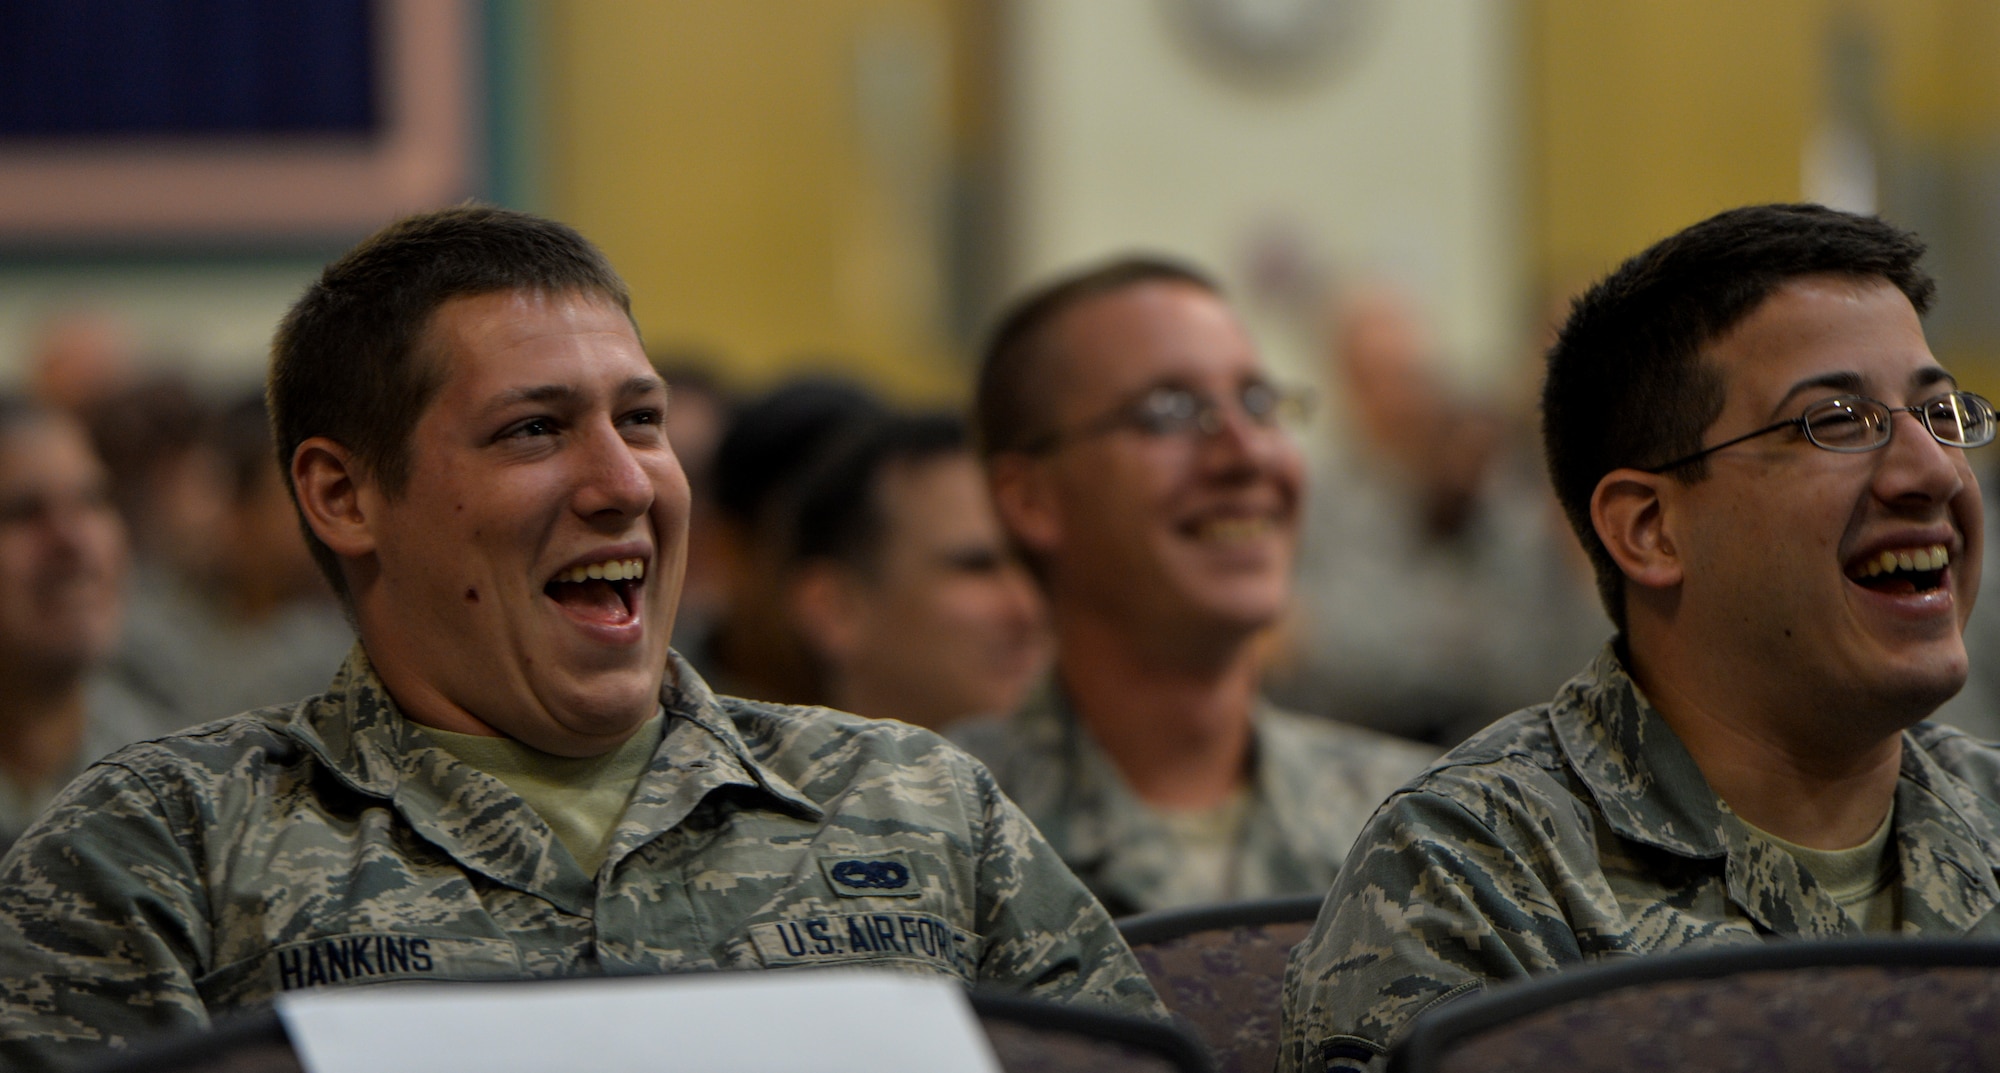 Airmen from Hurlburt Field laugh during resiliency training at Hurlburt Field, Fla. Sept. 24, 2014. Comedian Bernie McGrenahan spoke to Airmen about the importance of resiliency in a humor filled presentation. (U.S. Air Force photo/Senior Airman Christopher Callaway)  